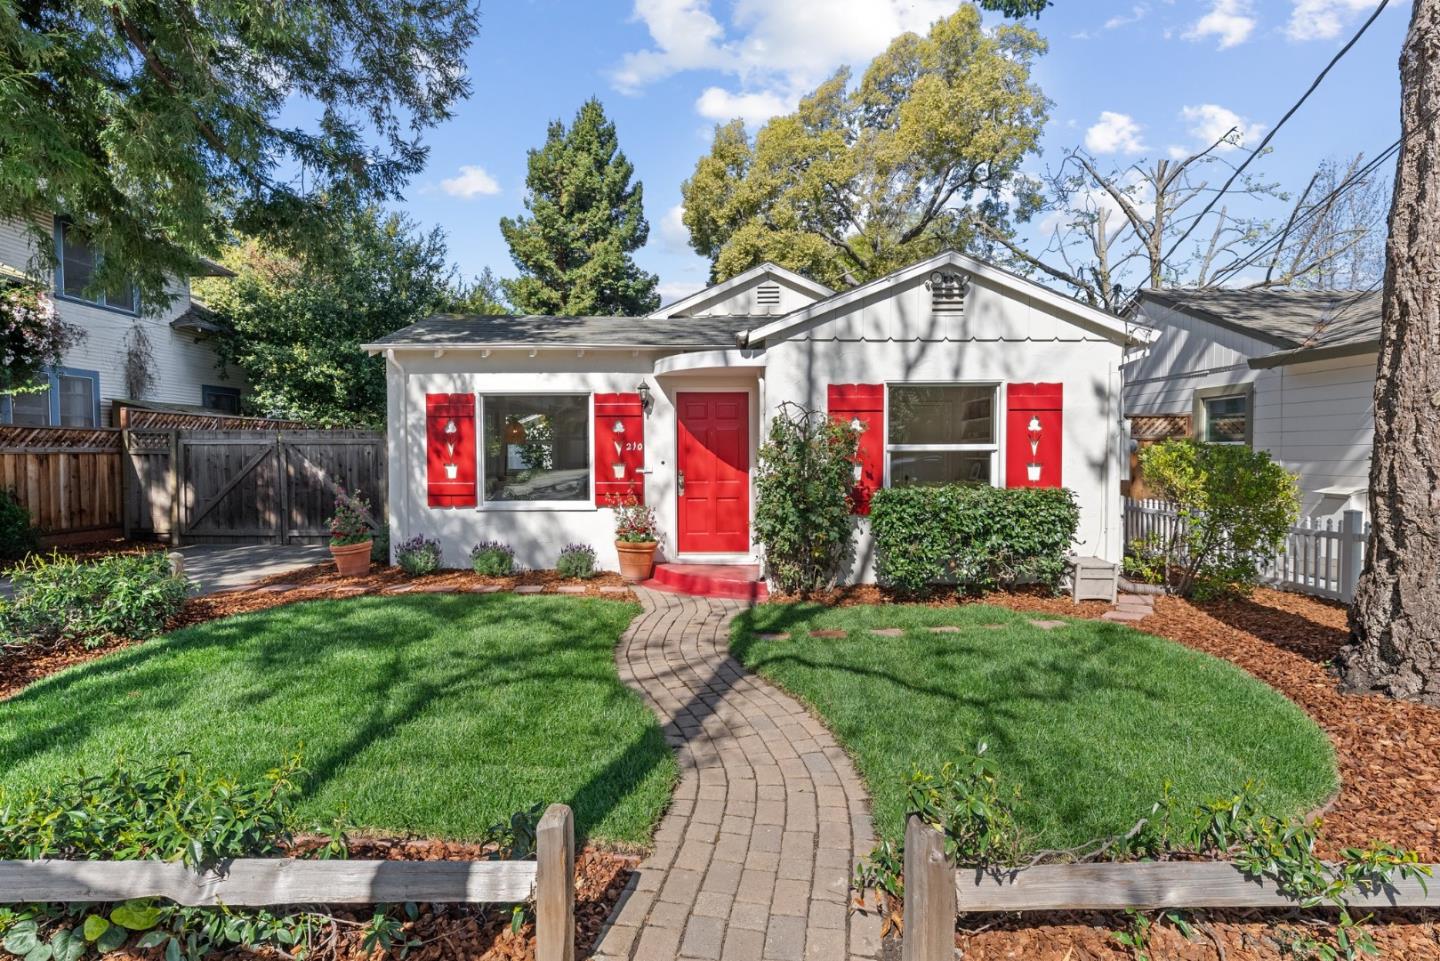 Photo of 210 Mariposa Ave in Mountain View, CA